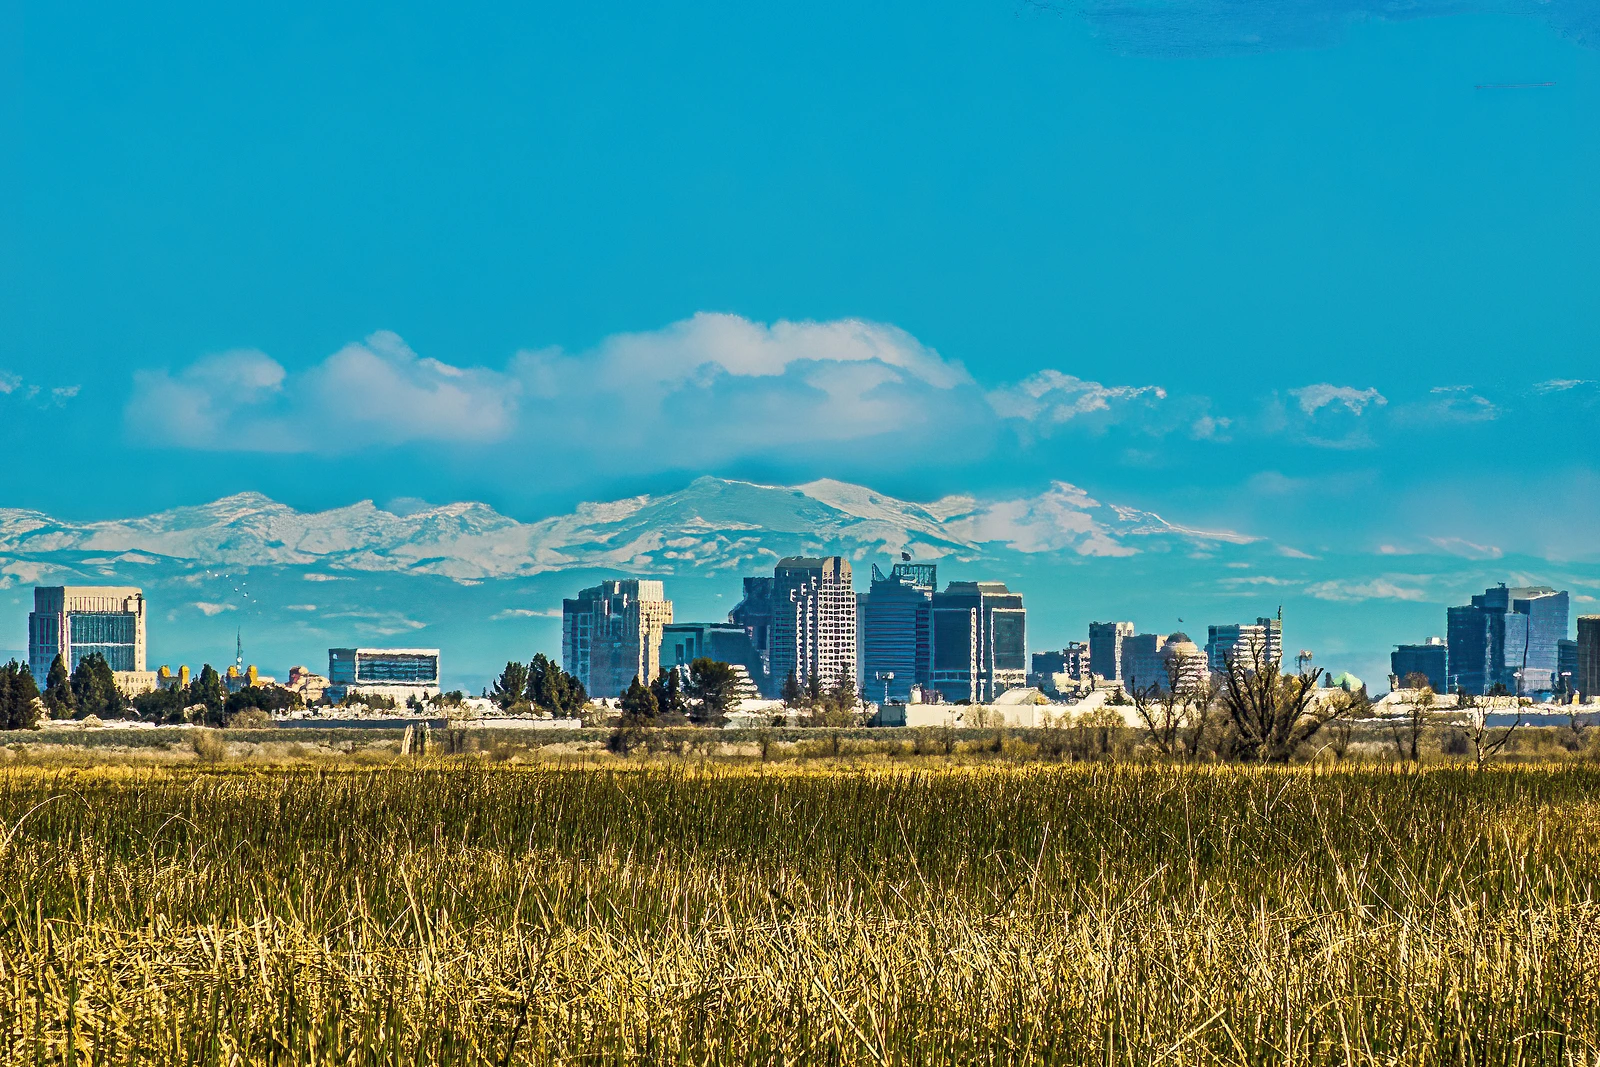 Clouds, mountains, city, fields. State capitol skyline from Yolo Bypass